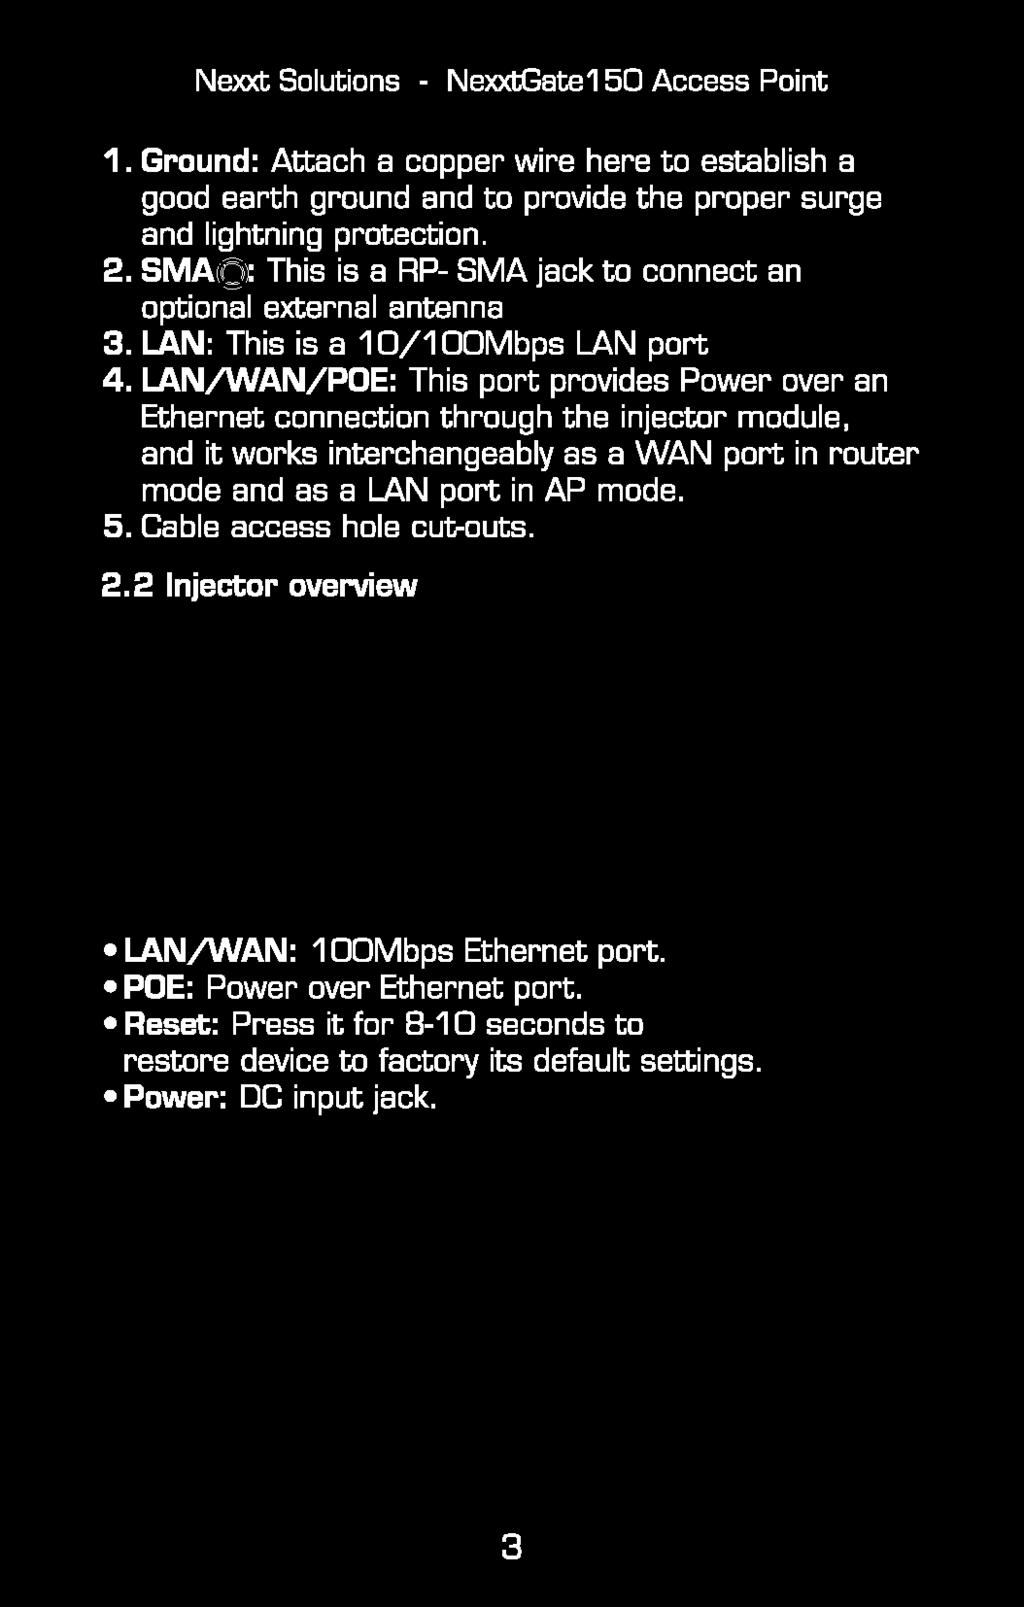 LAN/WAN/POE: This port provides Power over an Ethernet connection through the injector module, and it works interchangeably as a WAN port in router mode end as a